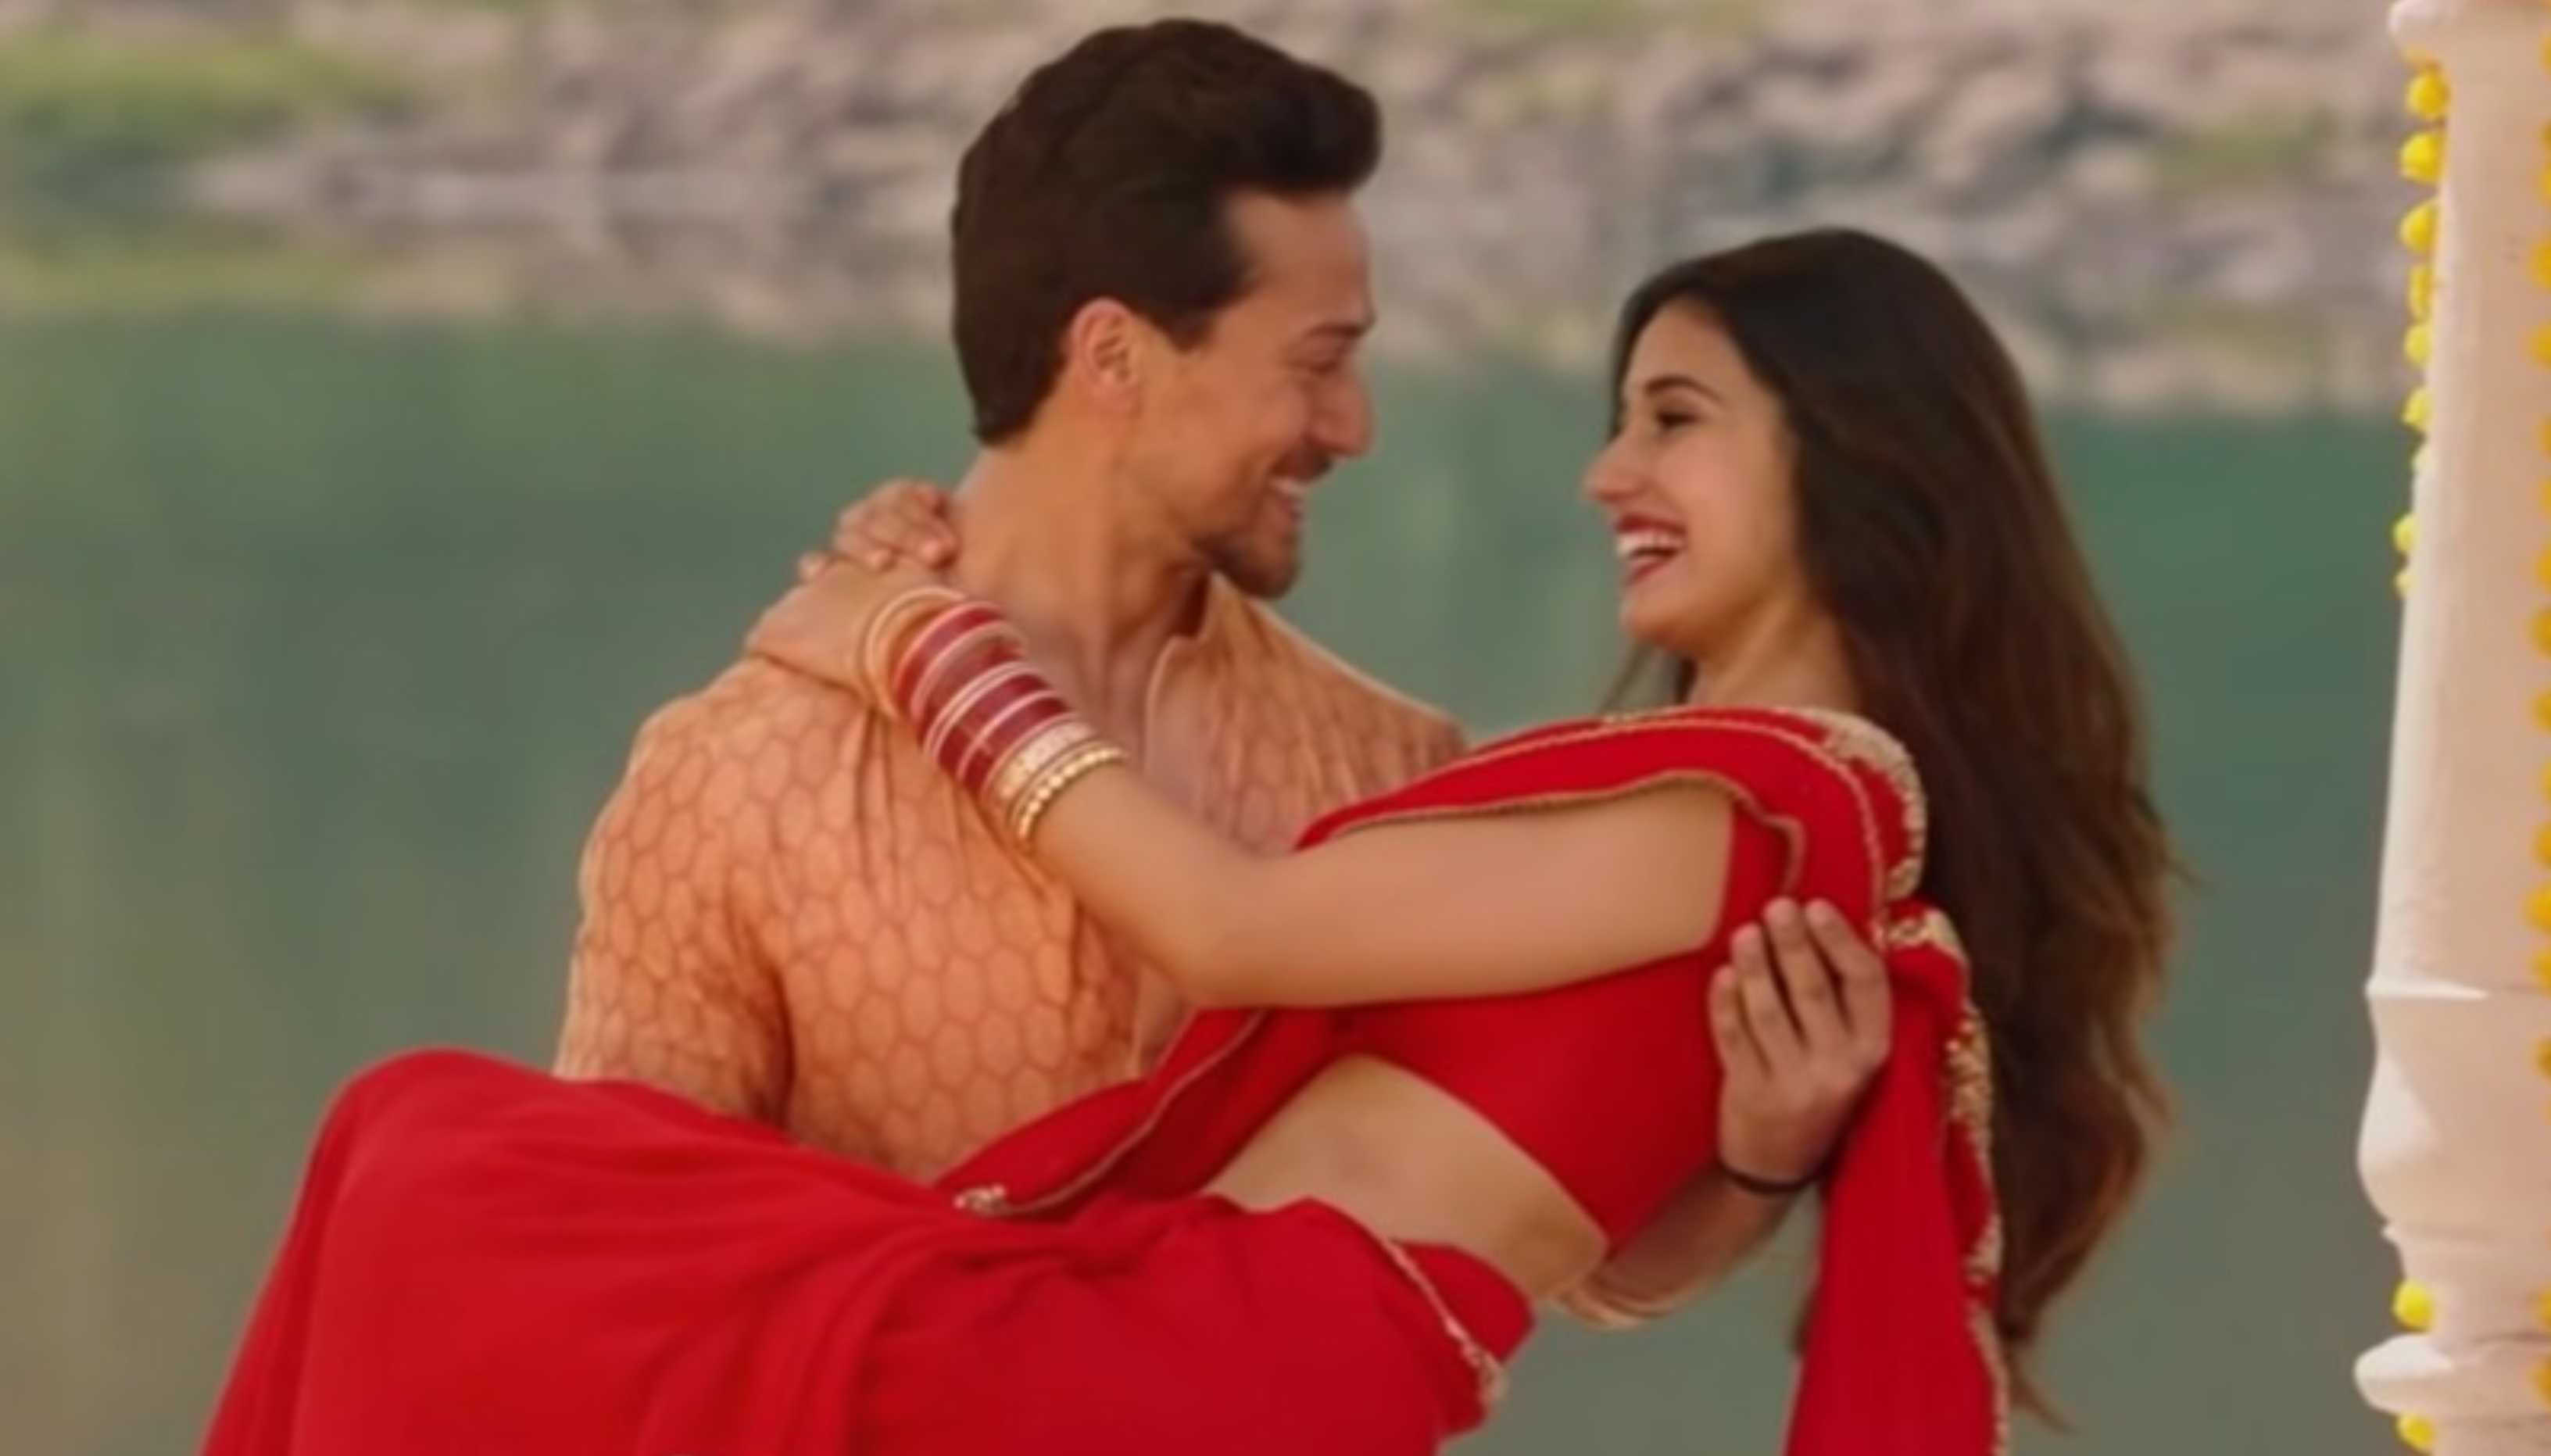 Disha Patani wanted to get married but Tiger Shroff brushed it off? Here’s what we know about the break up